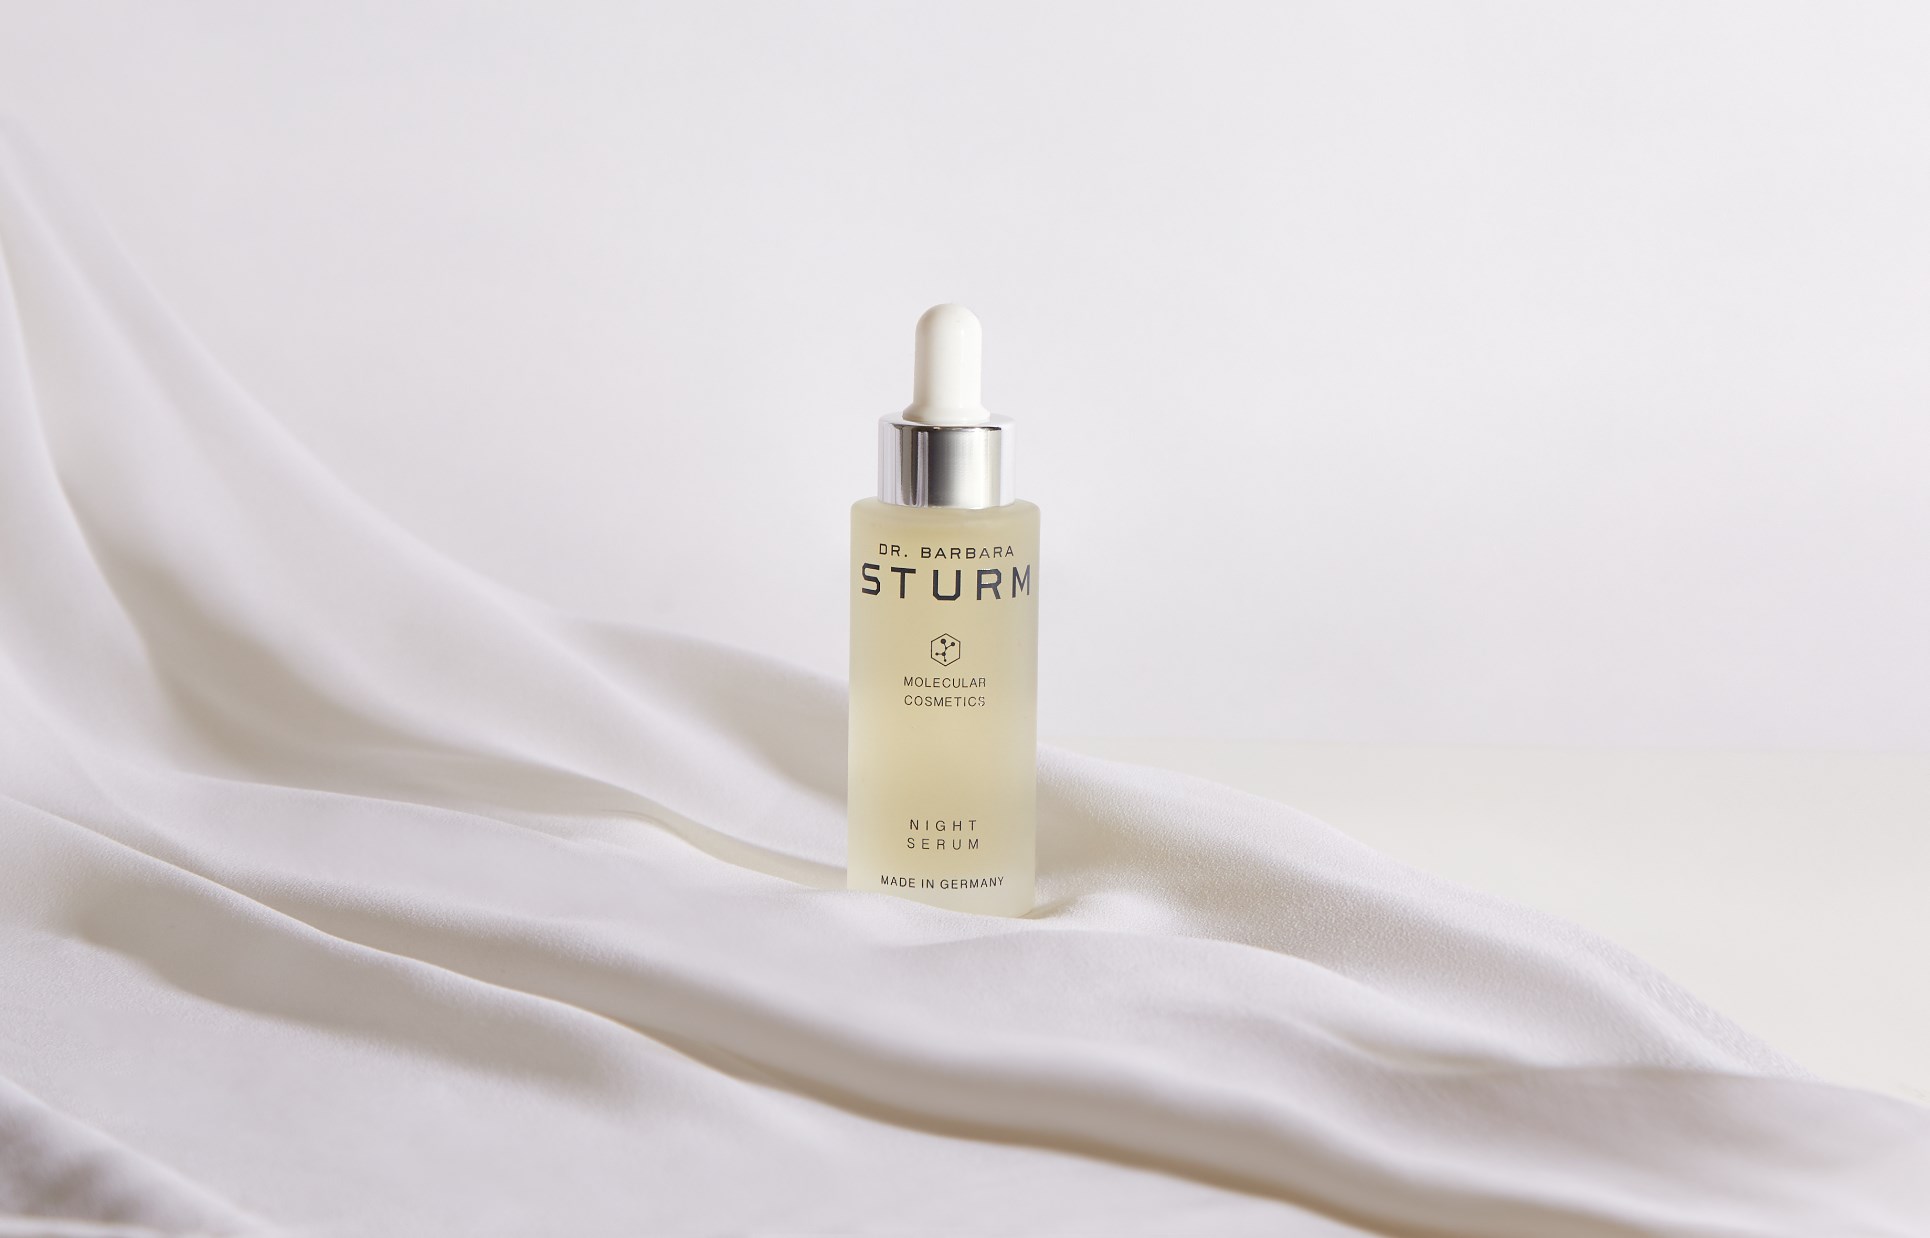 【#SkinSuperstars: Overnight wonder】 Wake up with skin fresh as morning dew with the latest Night Serum from Dr